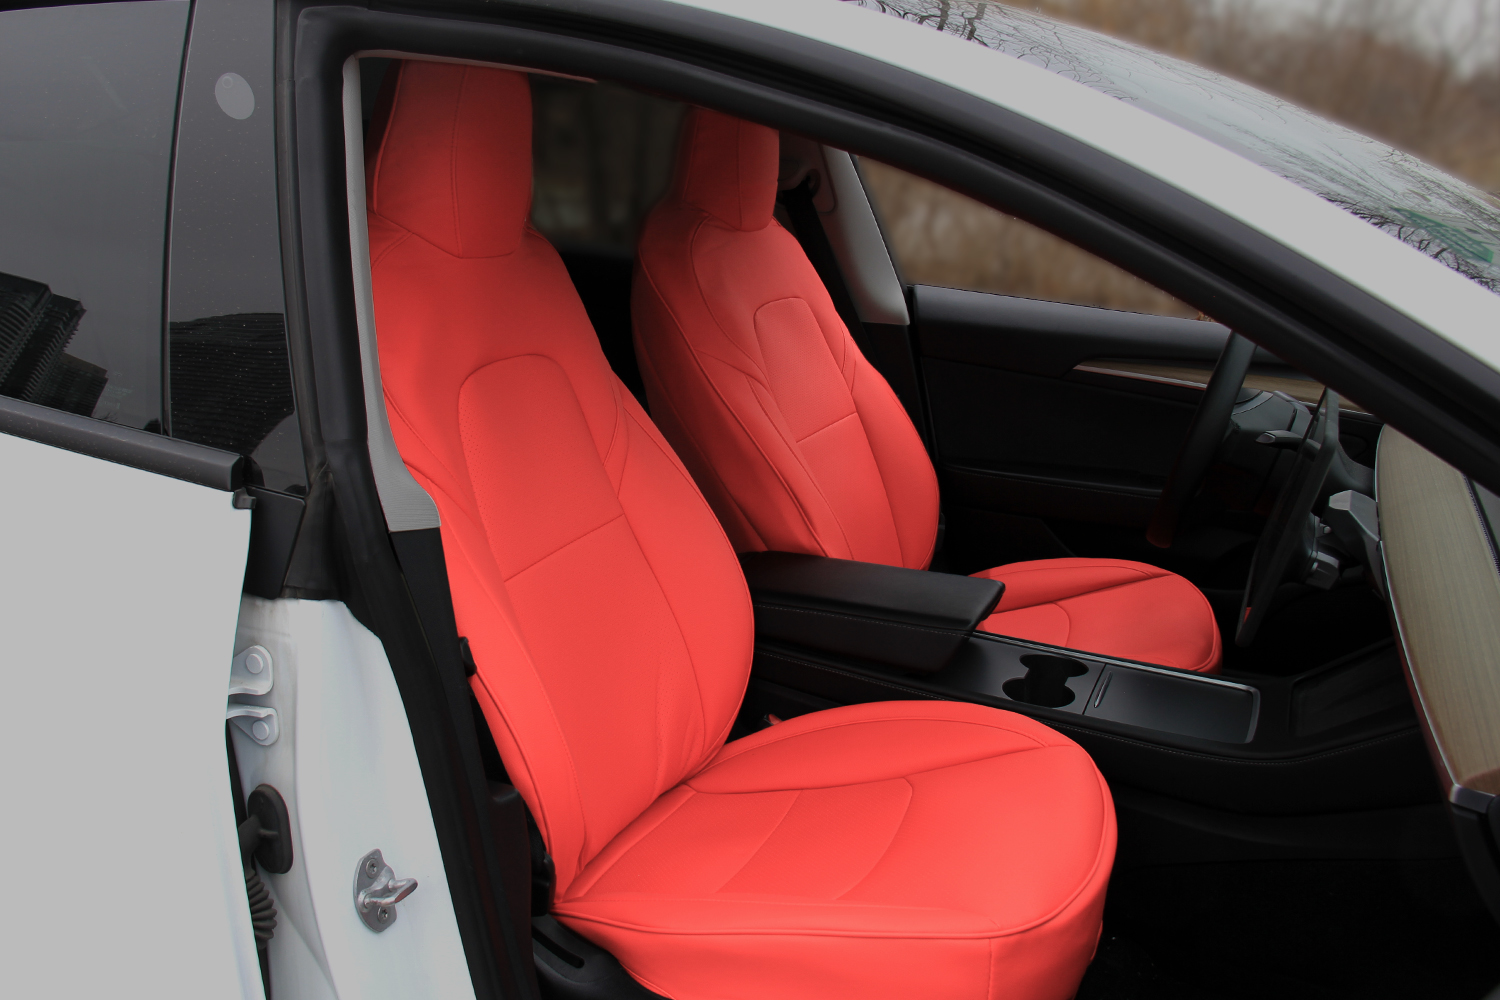 https://tesloid.com/wp-content/uploads/2023/03/Tesla_Model_Y3_seat_covers_red_0-1.jpg